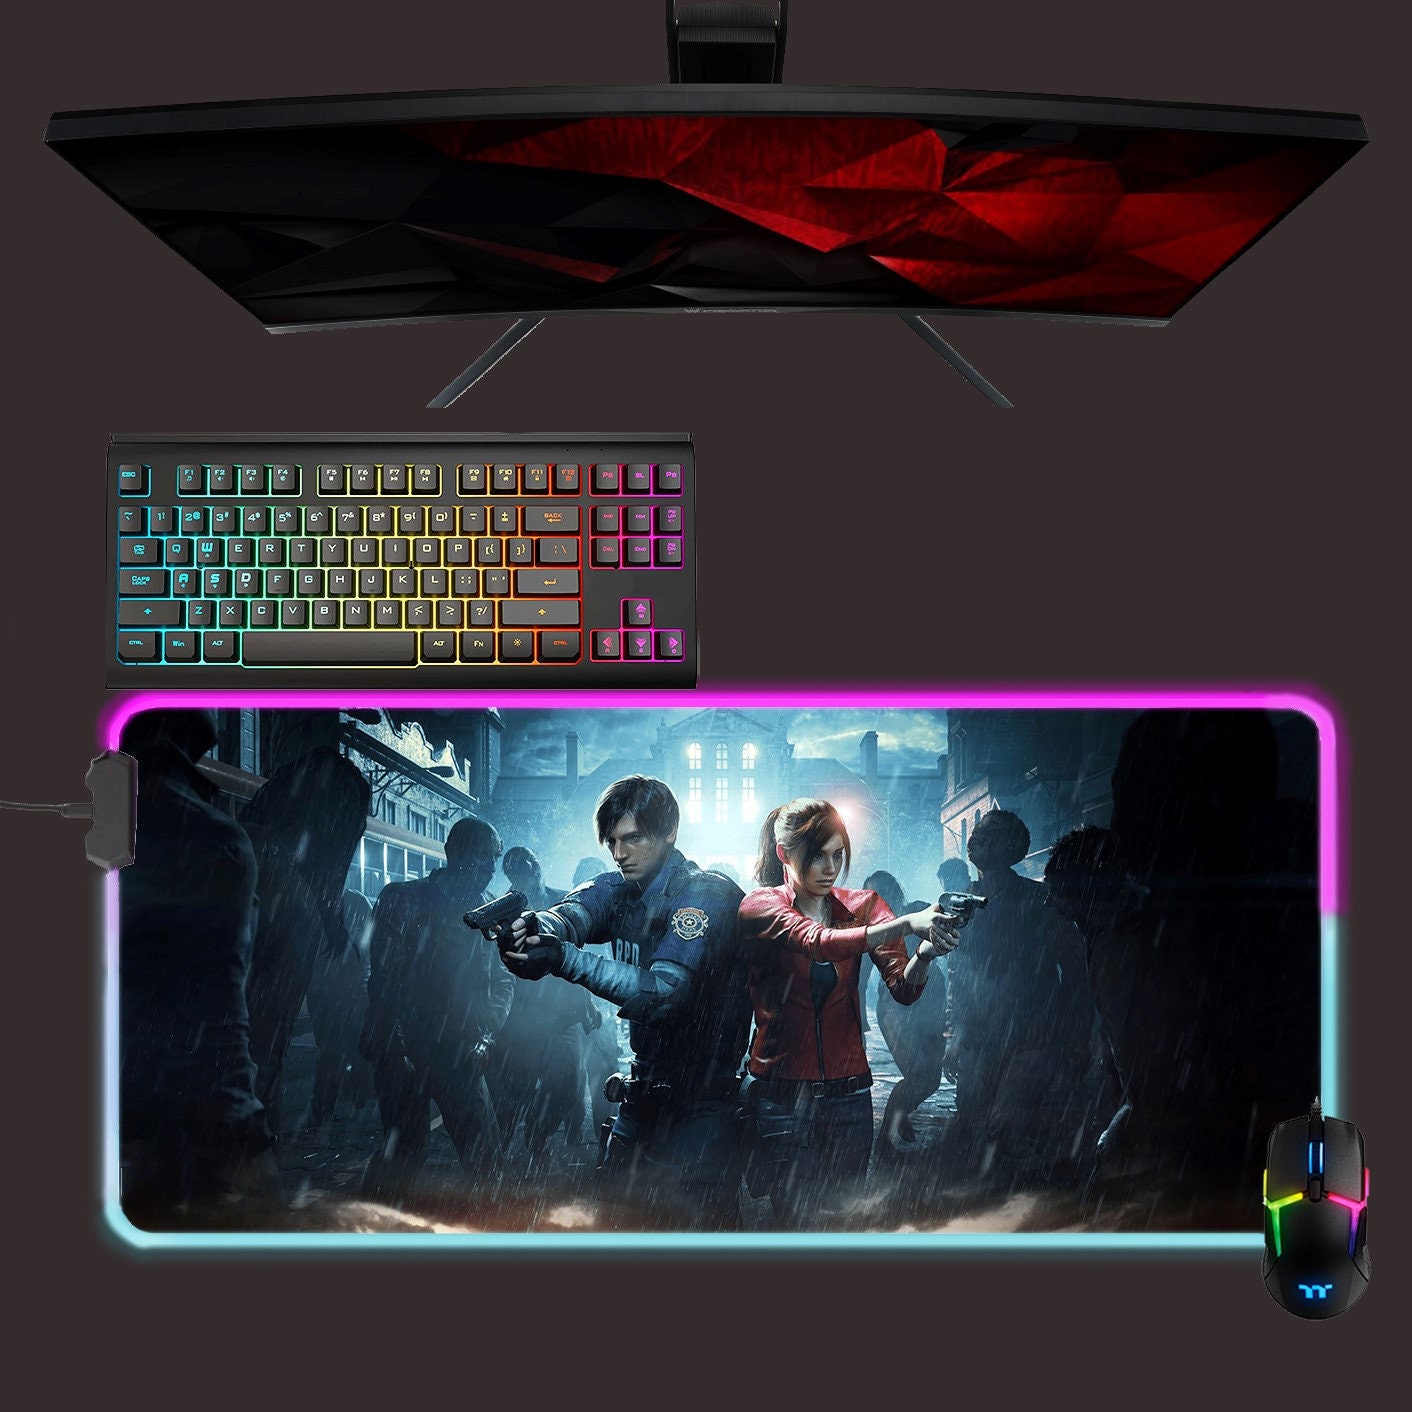 Resident Evil Gaming LED RGB mouse pads